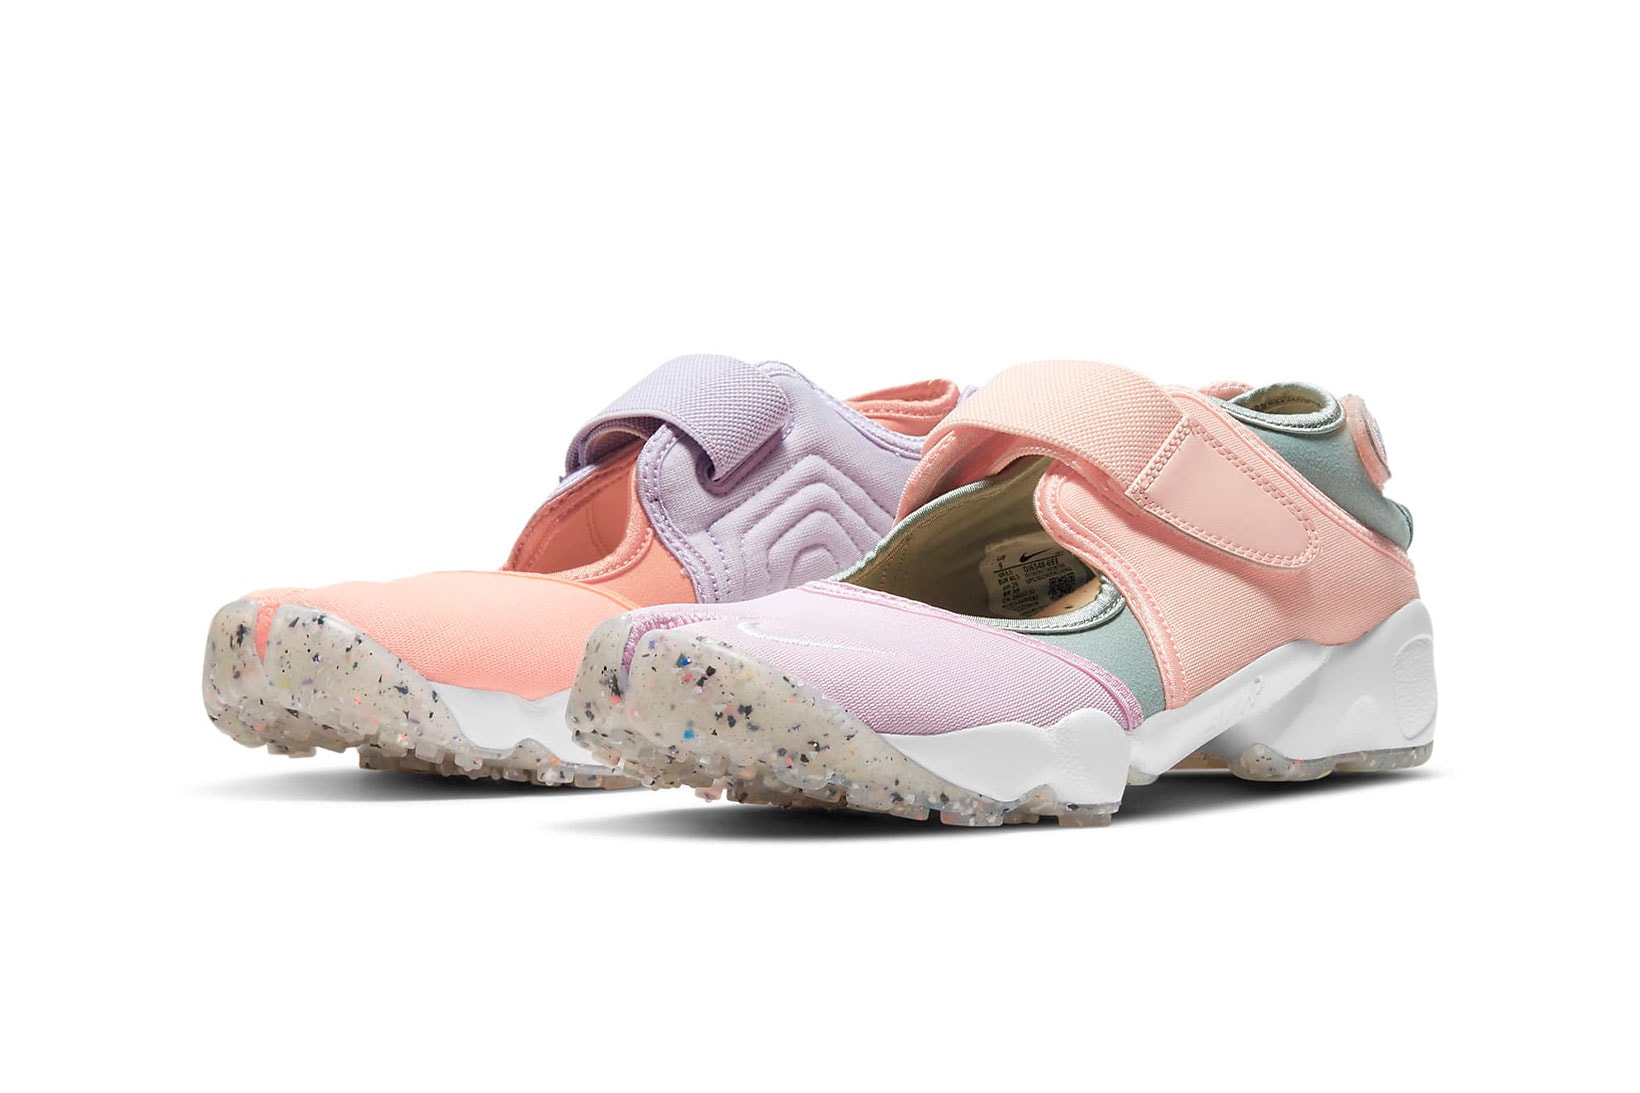 nike air rift womens shoes pastel pink purple green white footwear lateral